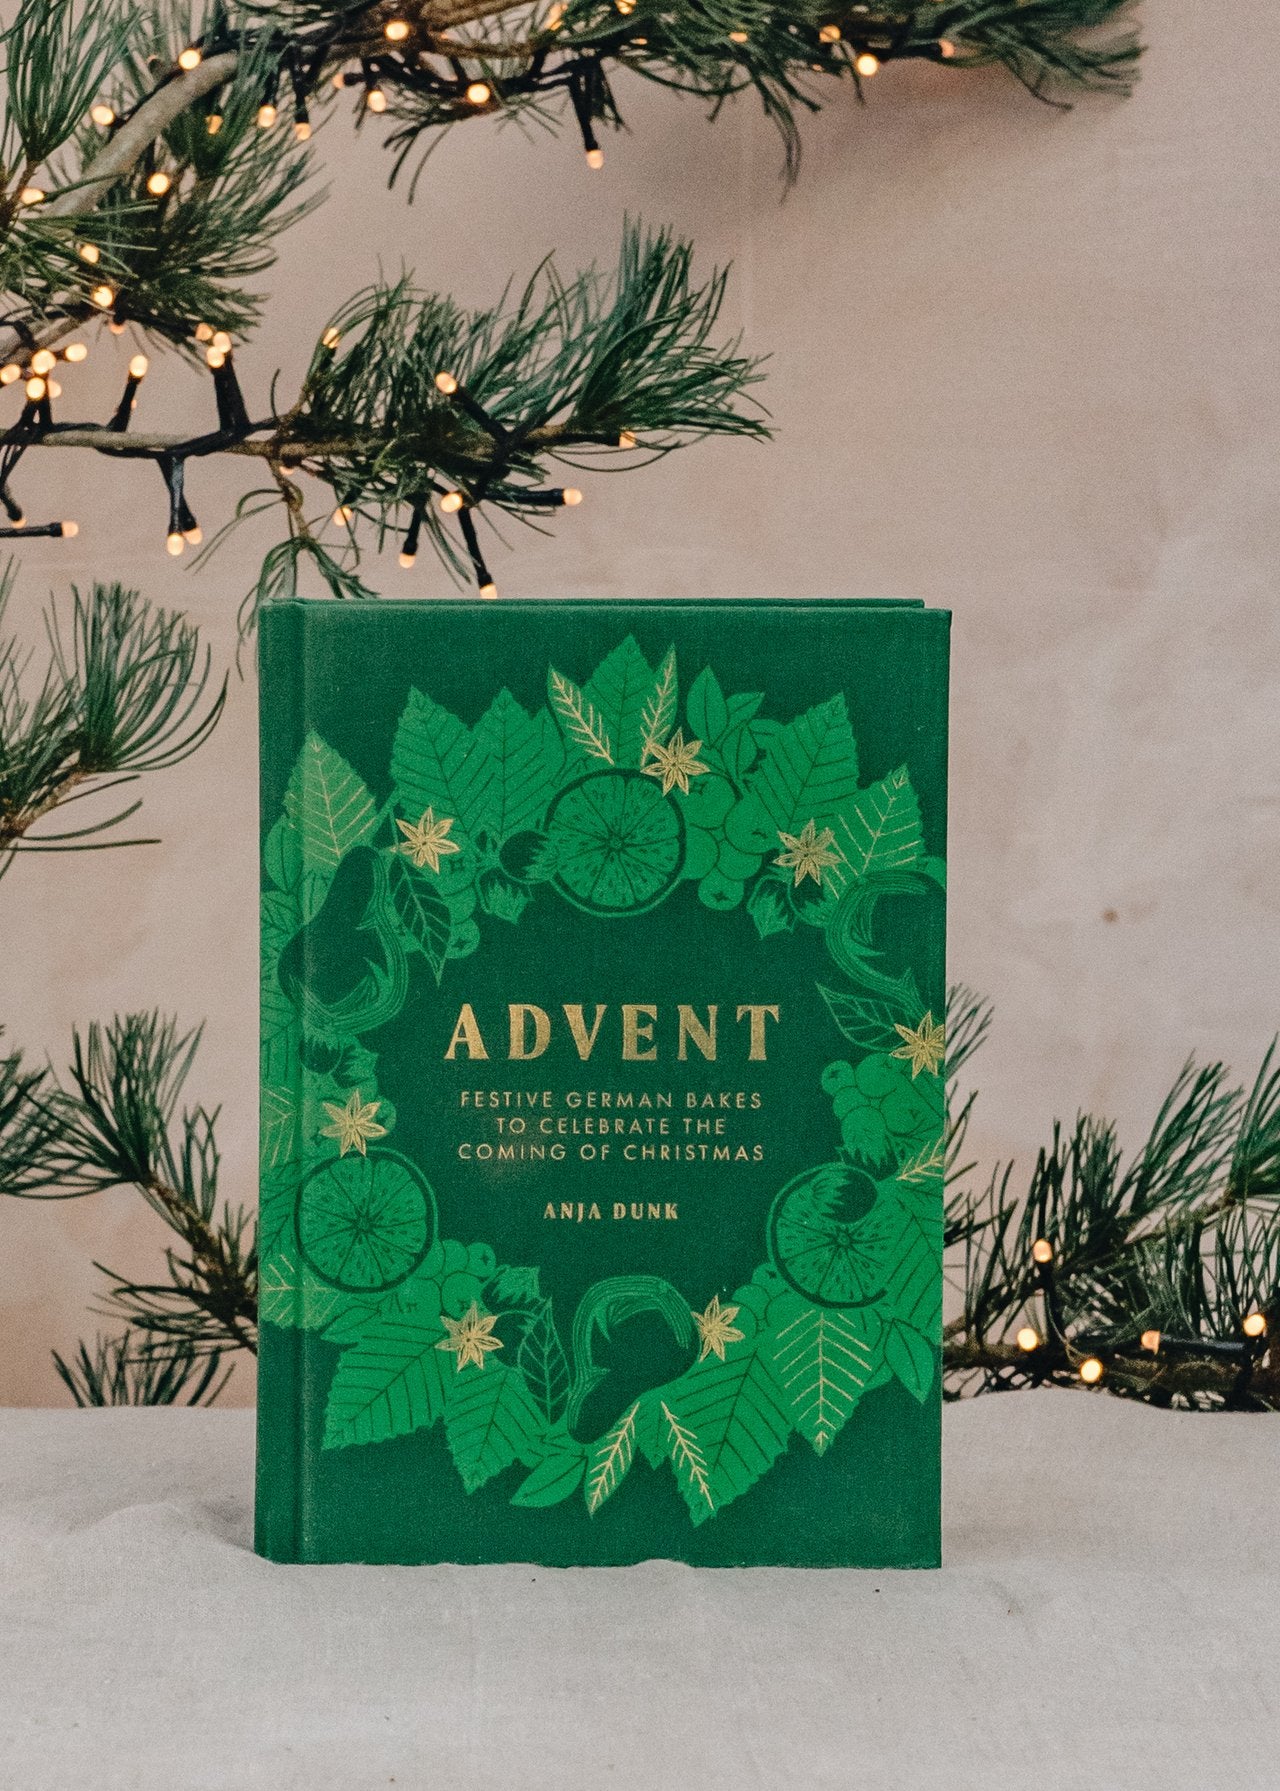 In Review: Advent, Festive Bakes